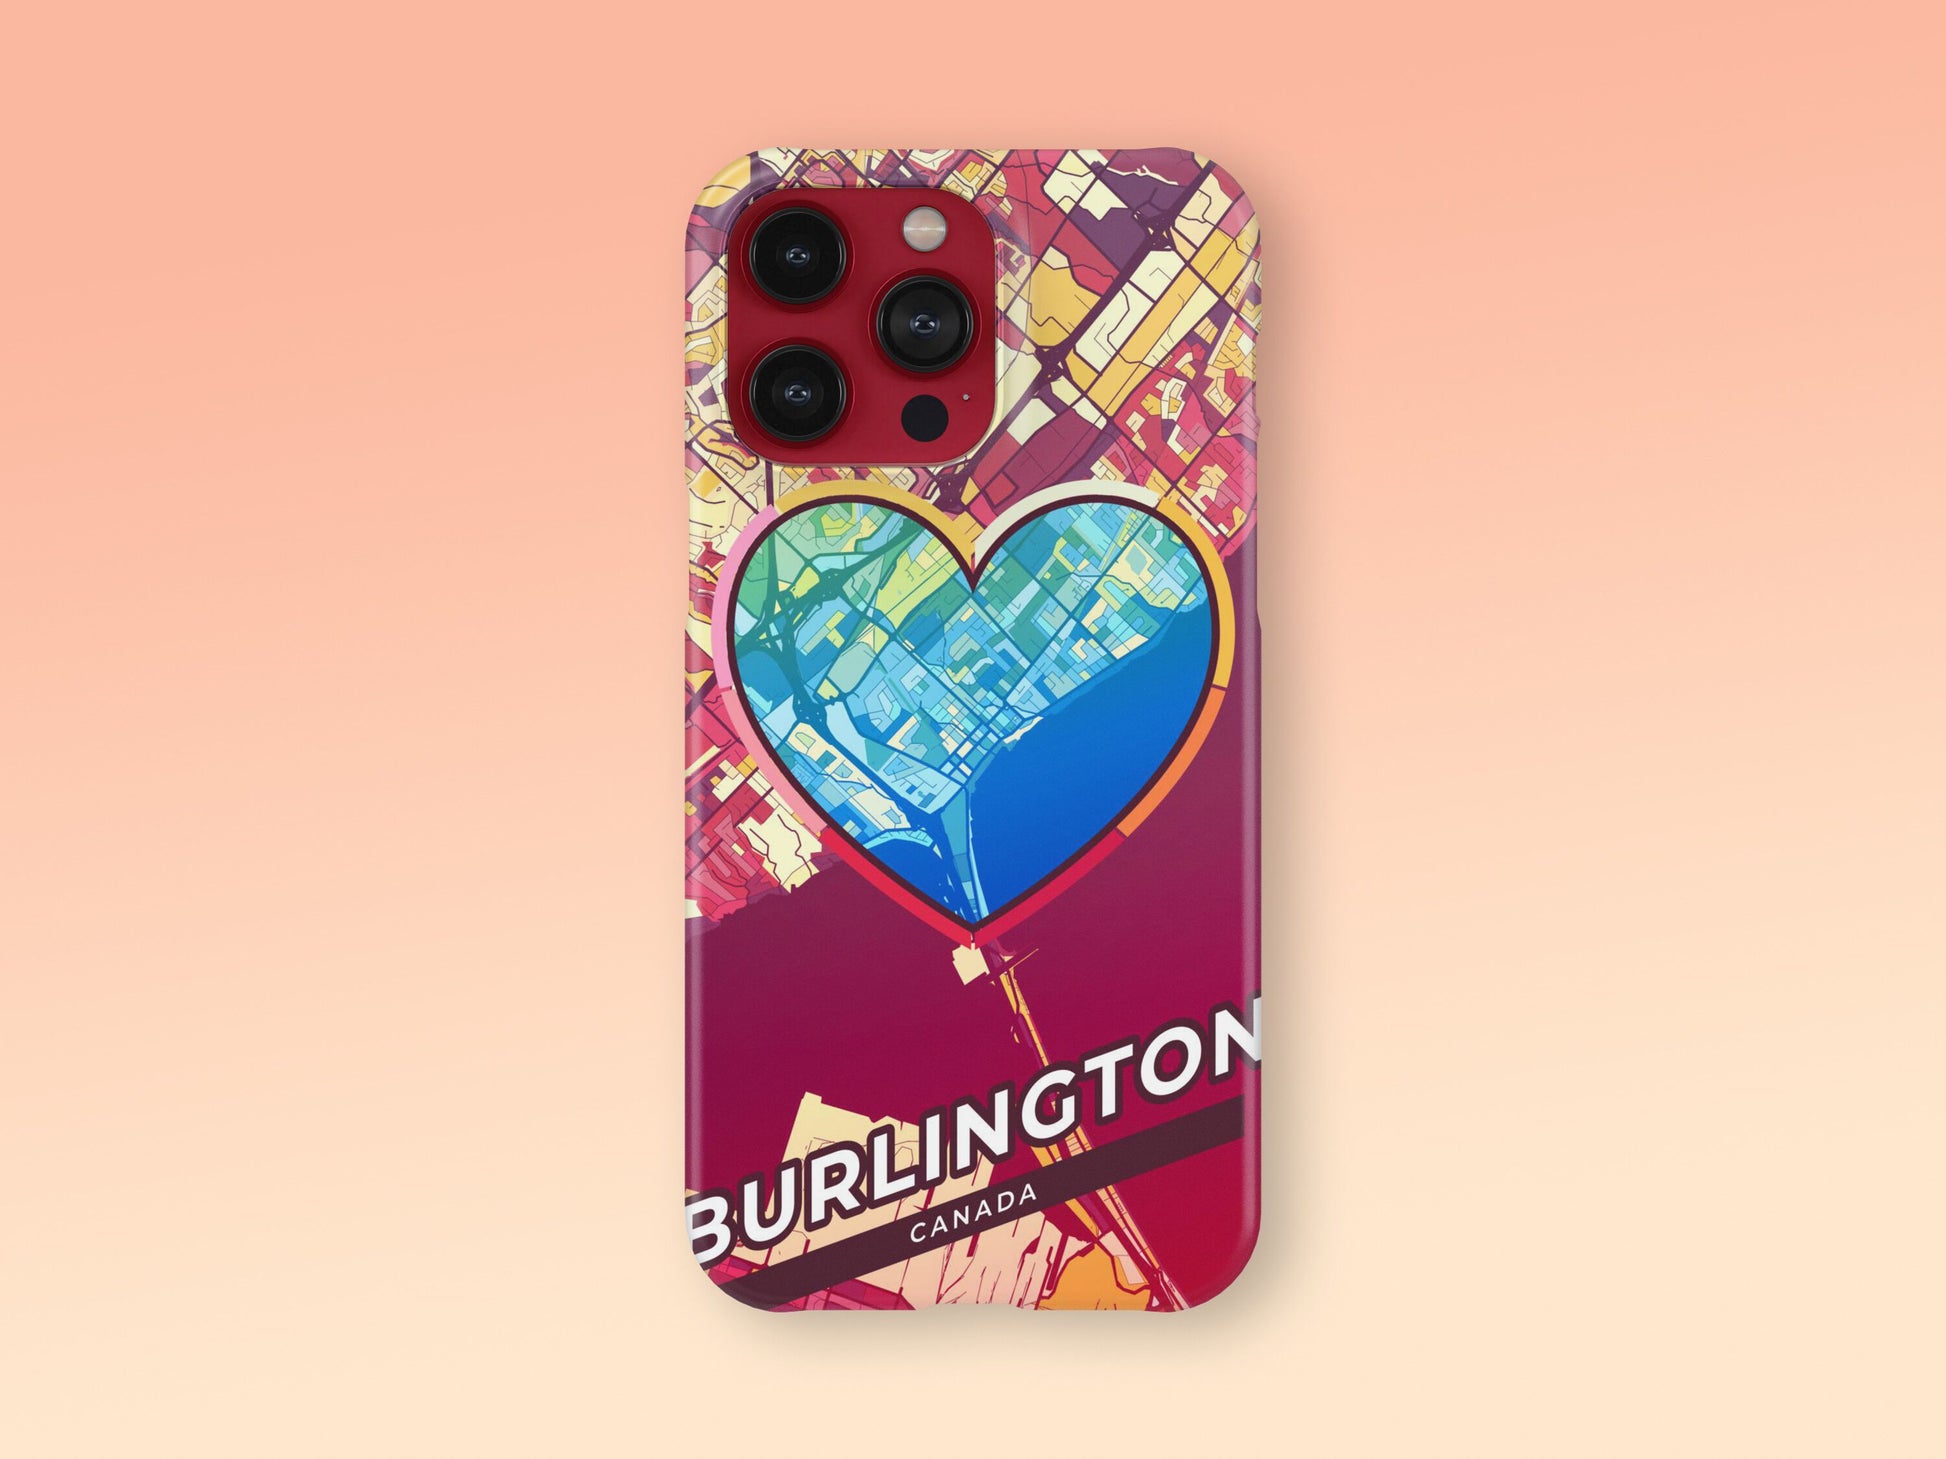 Burlington Canada slim phone case with colorful icon. Birthday, wedding or housewarming gift. Couple match cases. 2